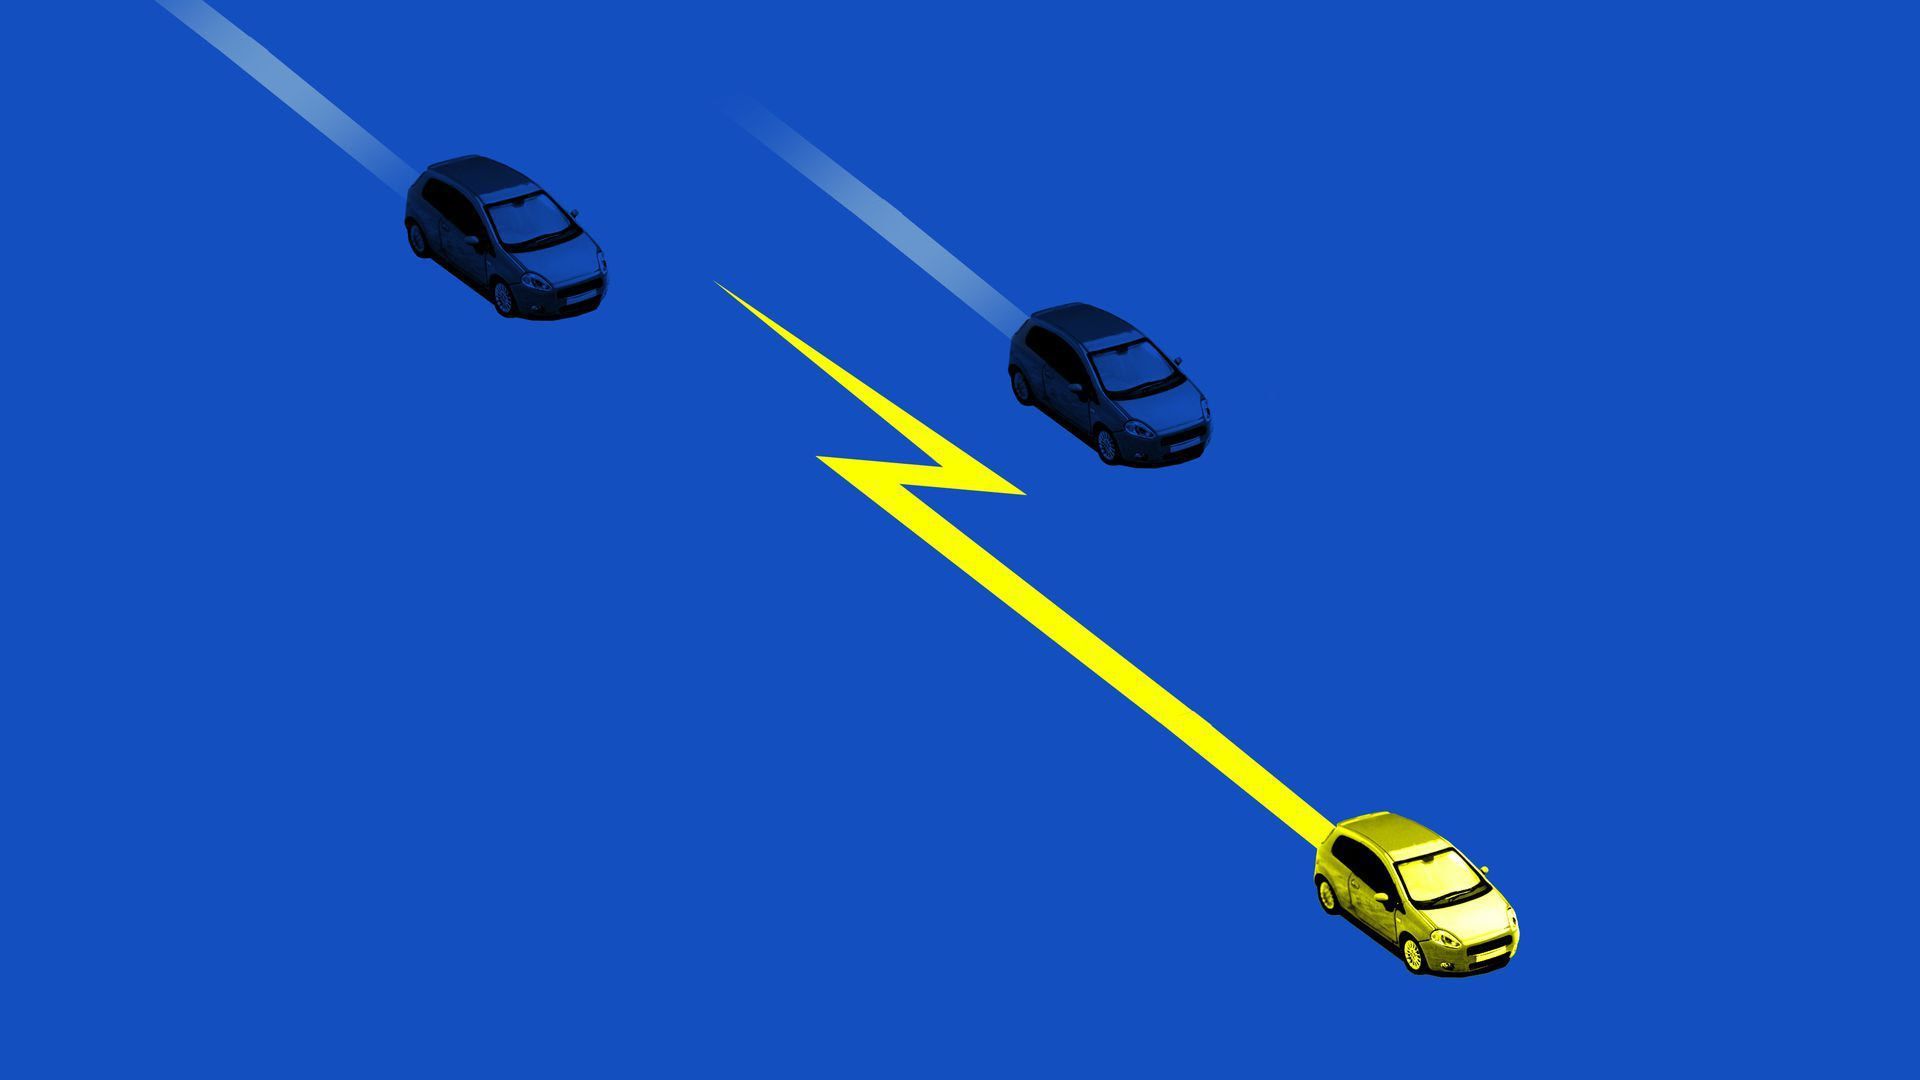 Illustration of cars zipping by one another